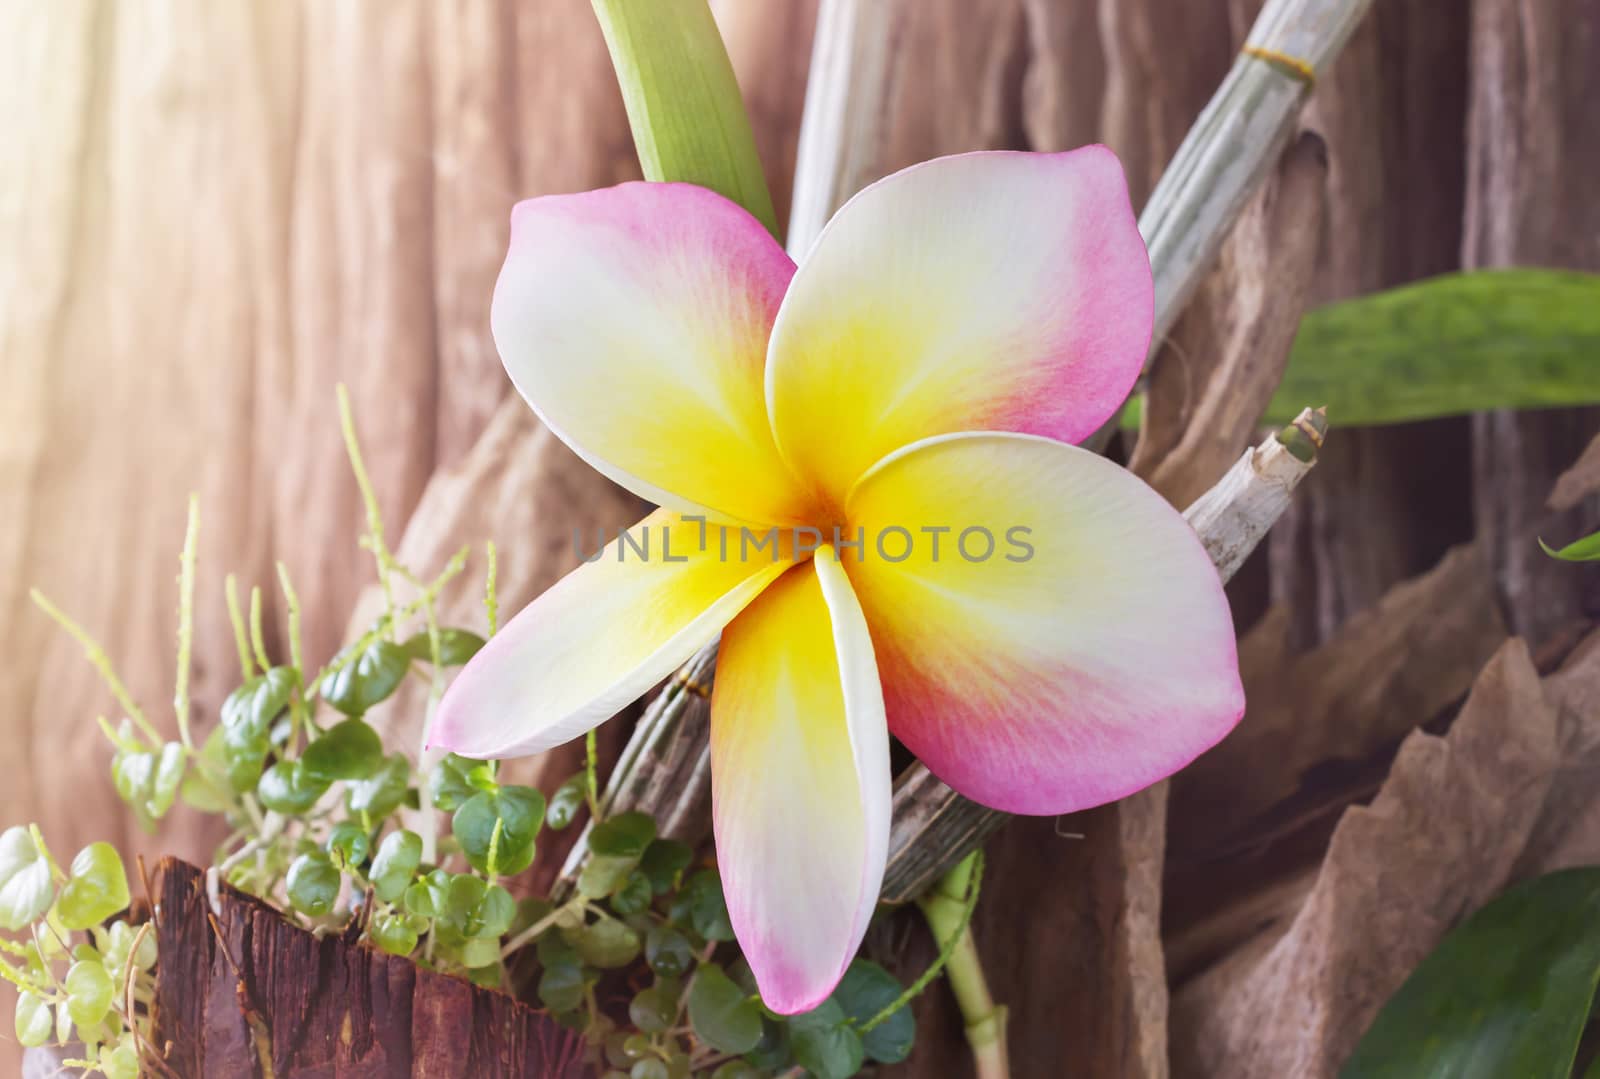 Beautiful single big pink yellow and white flower plumeria or frangipani in morning dreamy sunlight, frangipani in timber or piece of log wood background ant small green plant